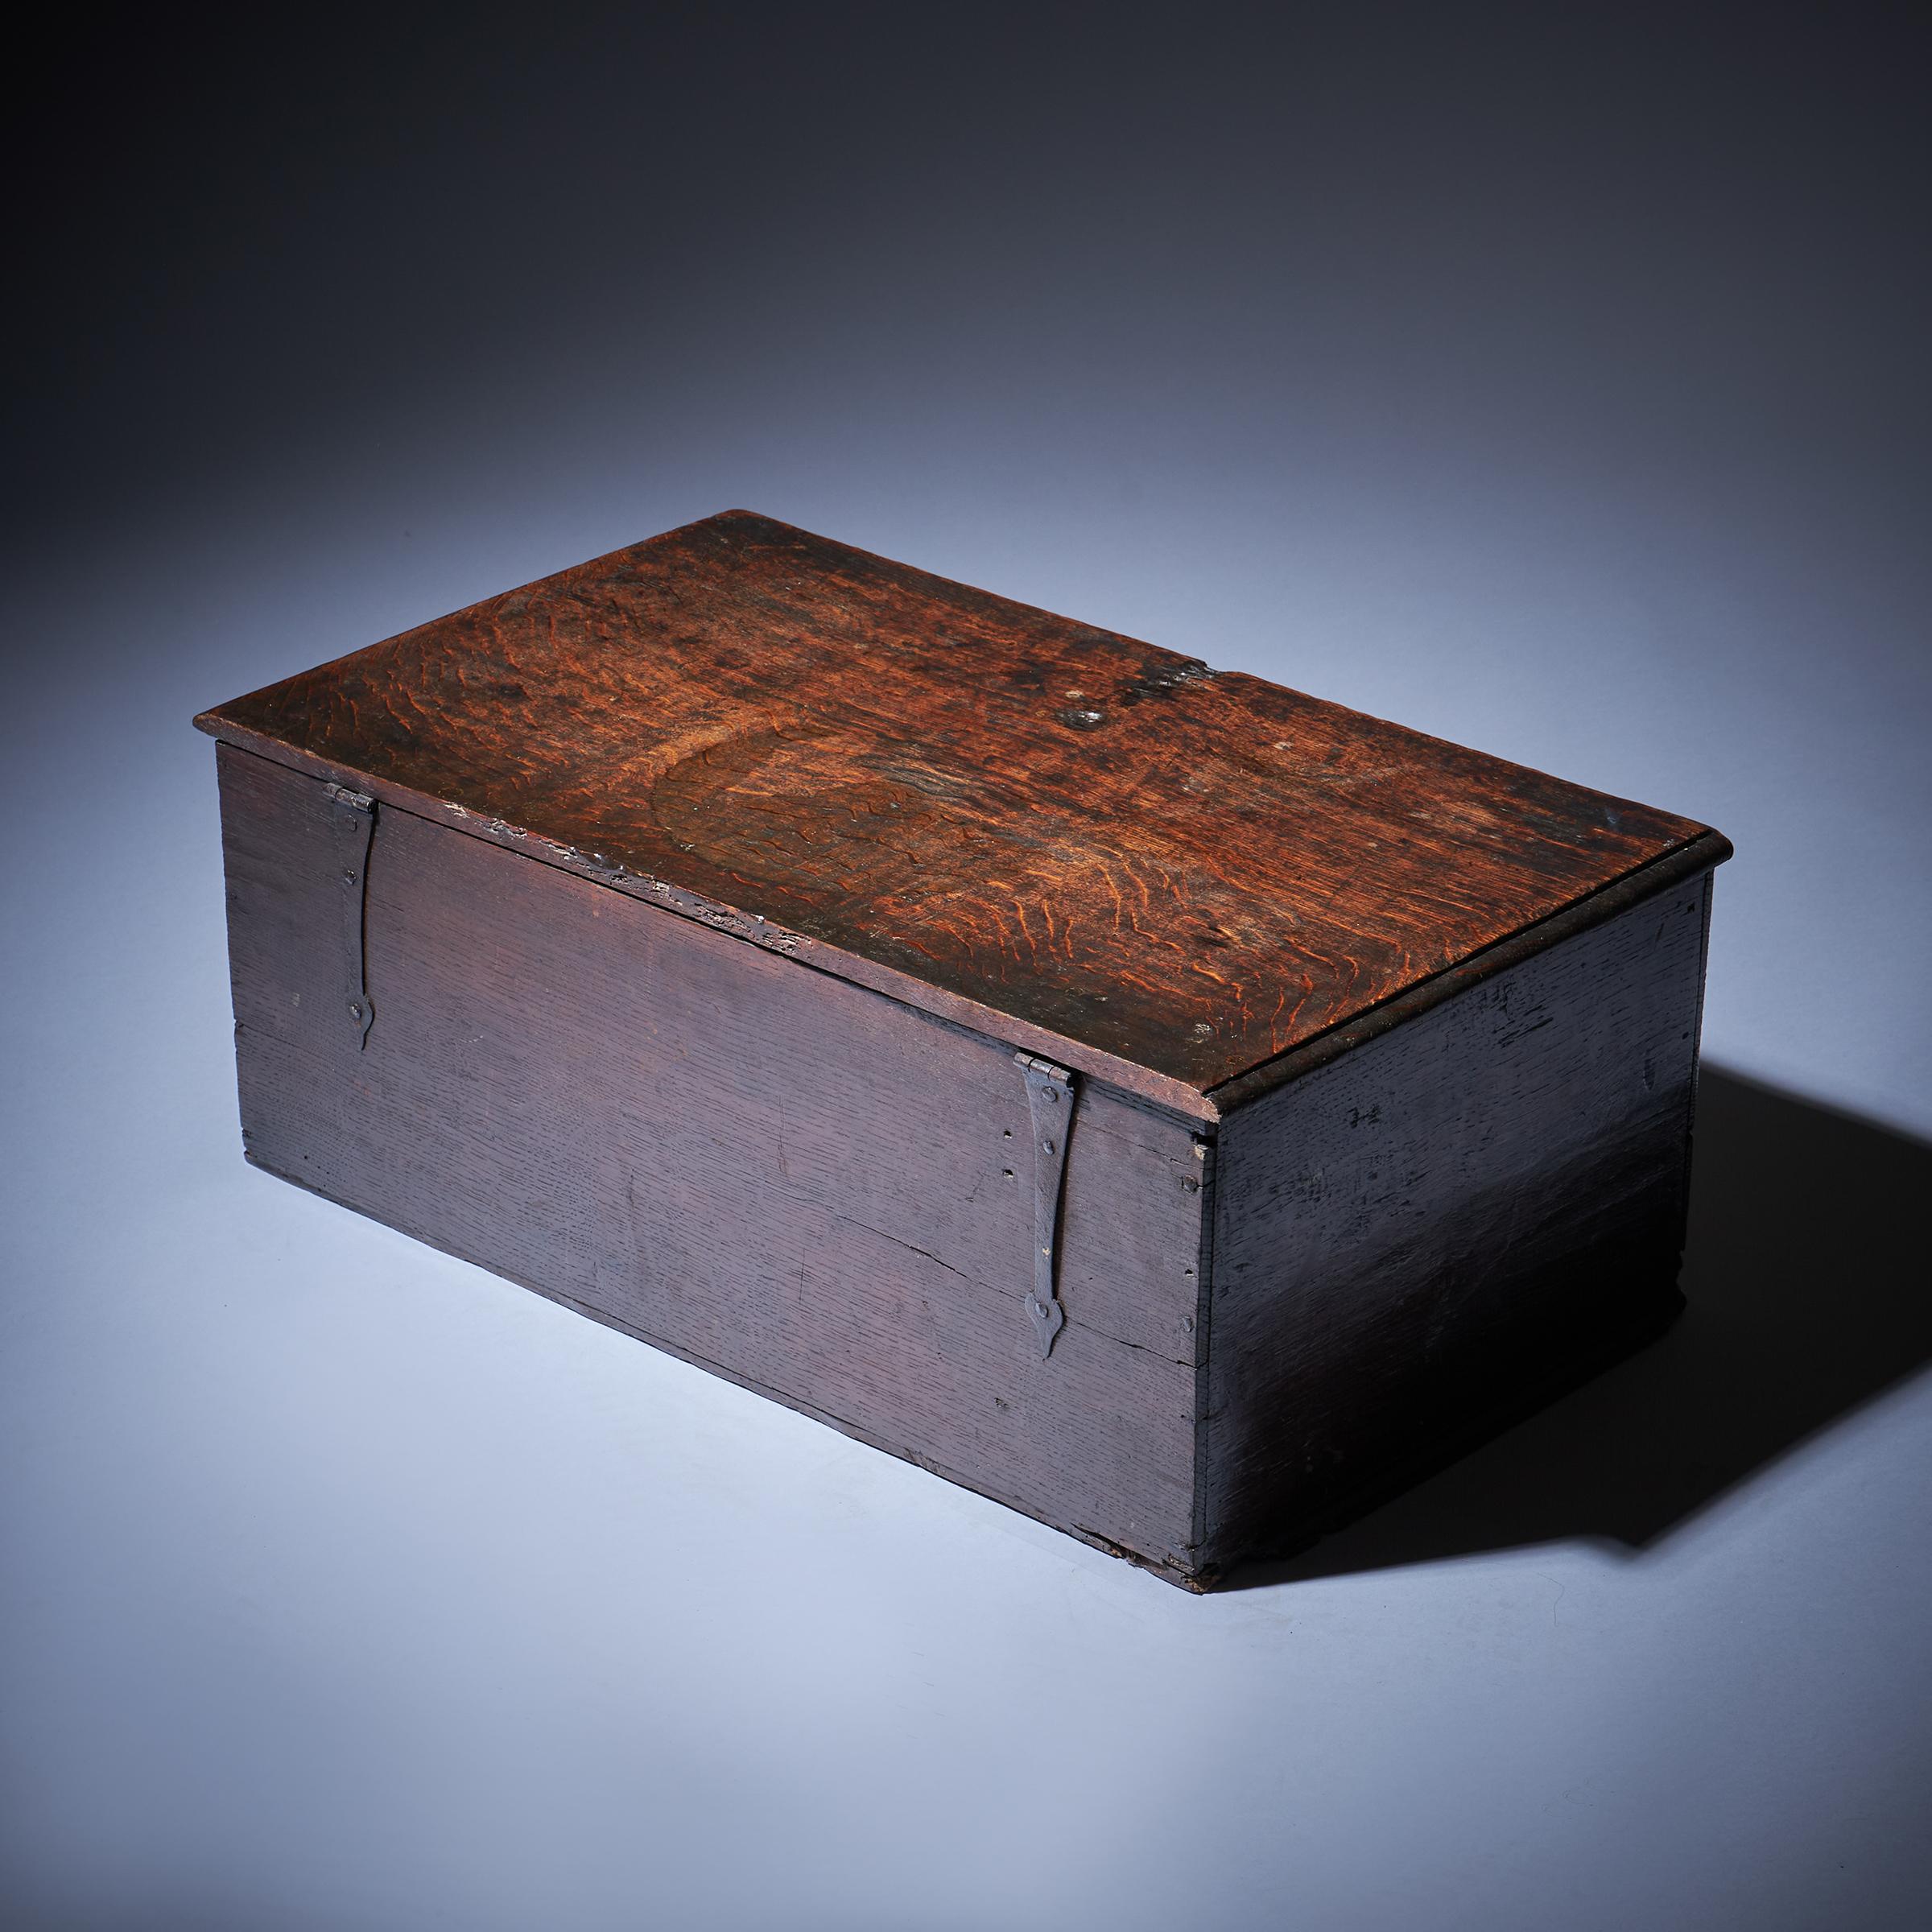 17th Century Charles I Carved Oak Box with Original Iron Clasp and Staple Lock-11